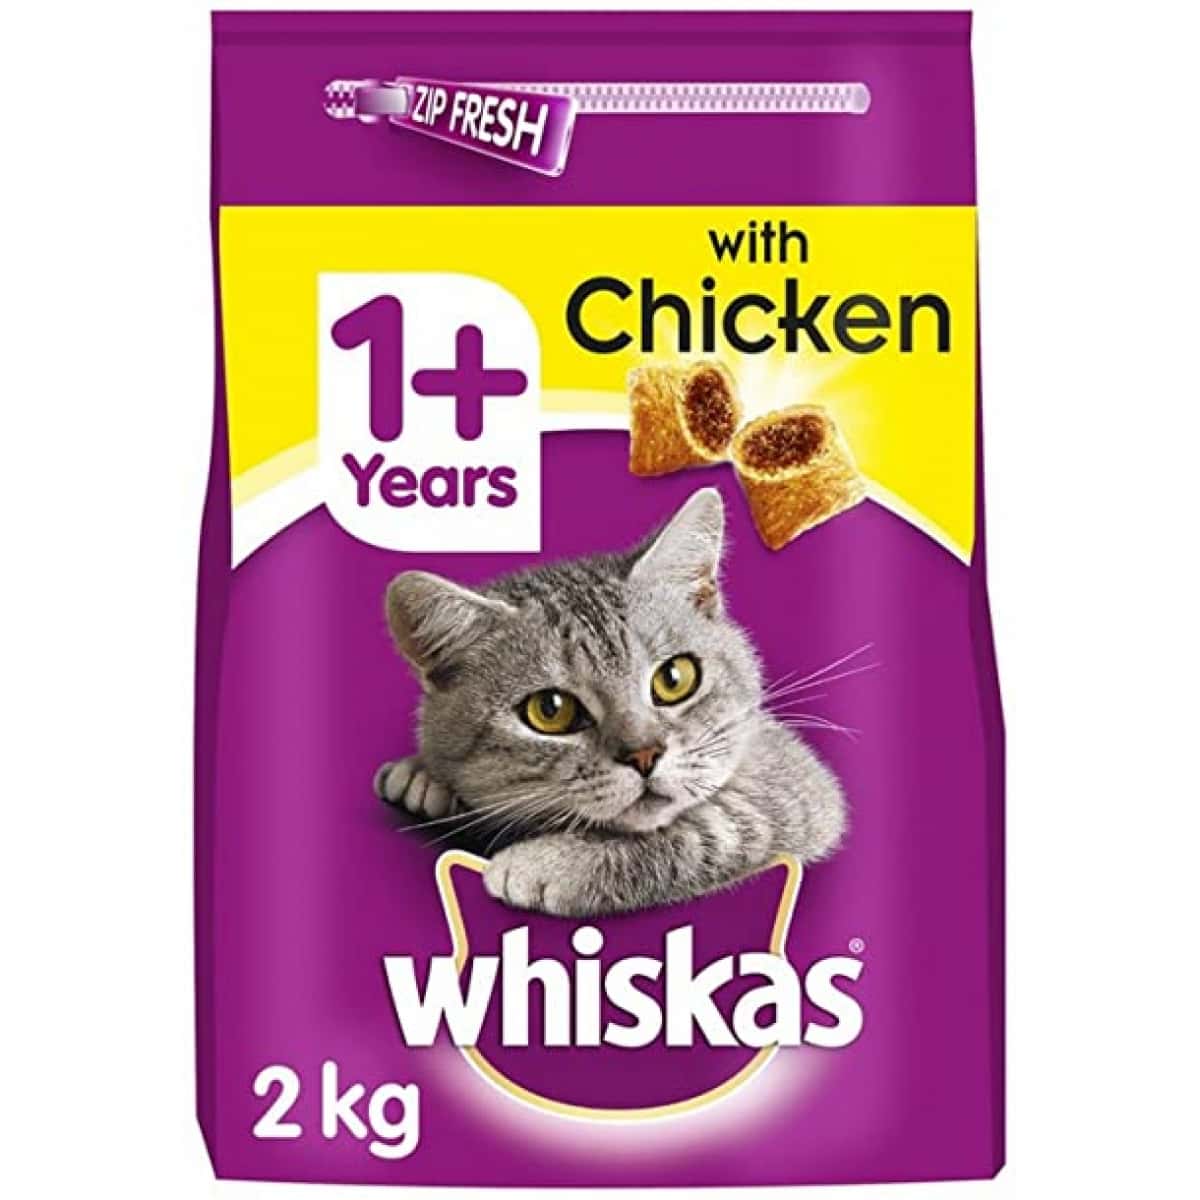 Whiskas Dry Cat Food Adult 1+ Chicken 2kg – Pawfect Supplies Ltd Product Image